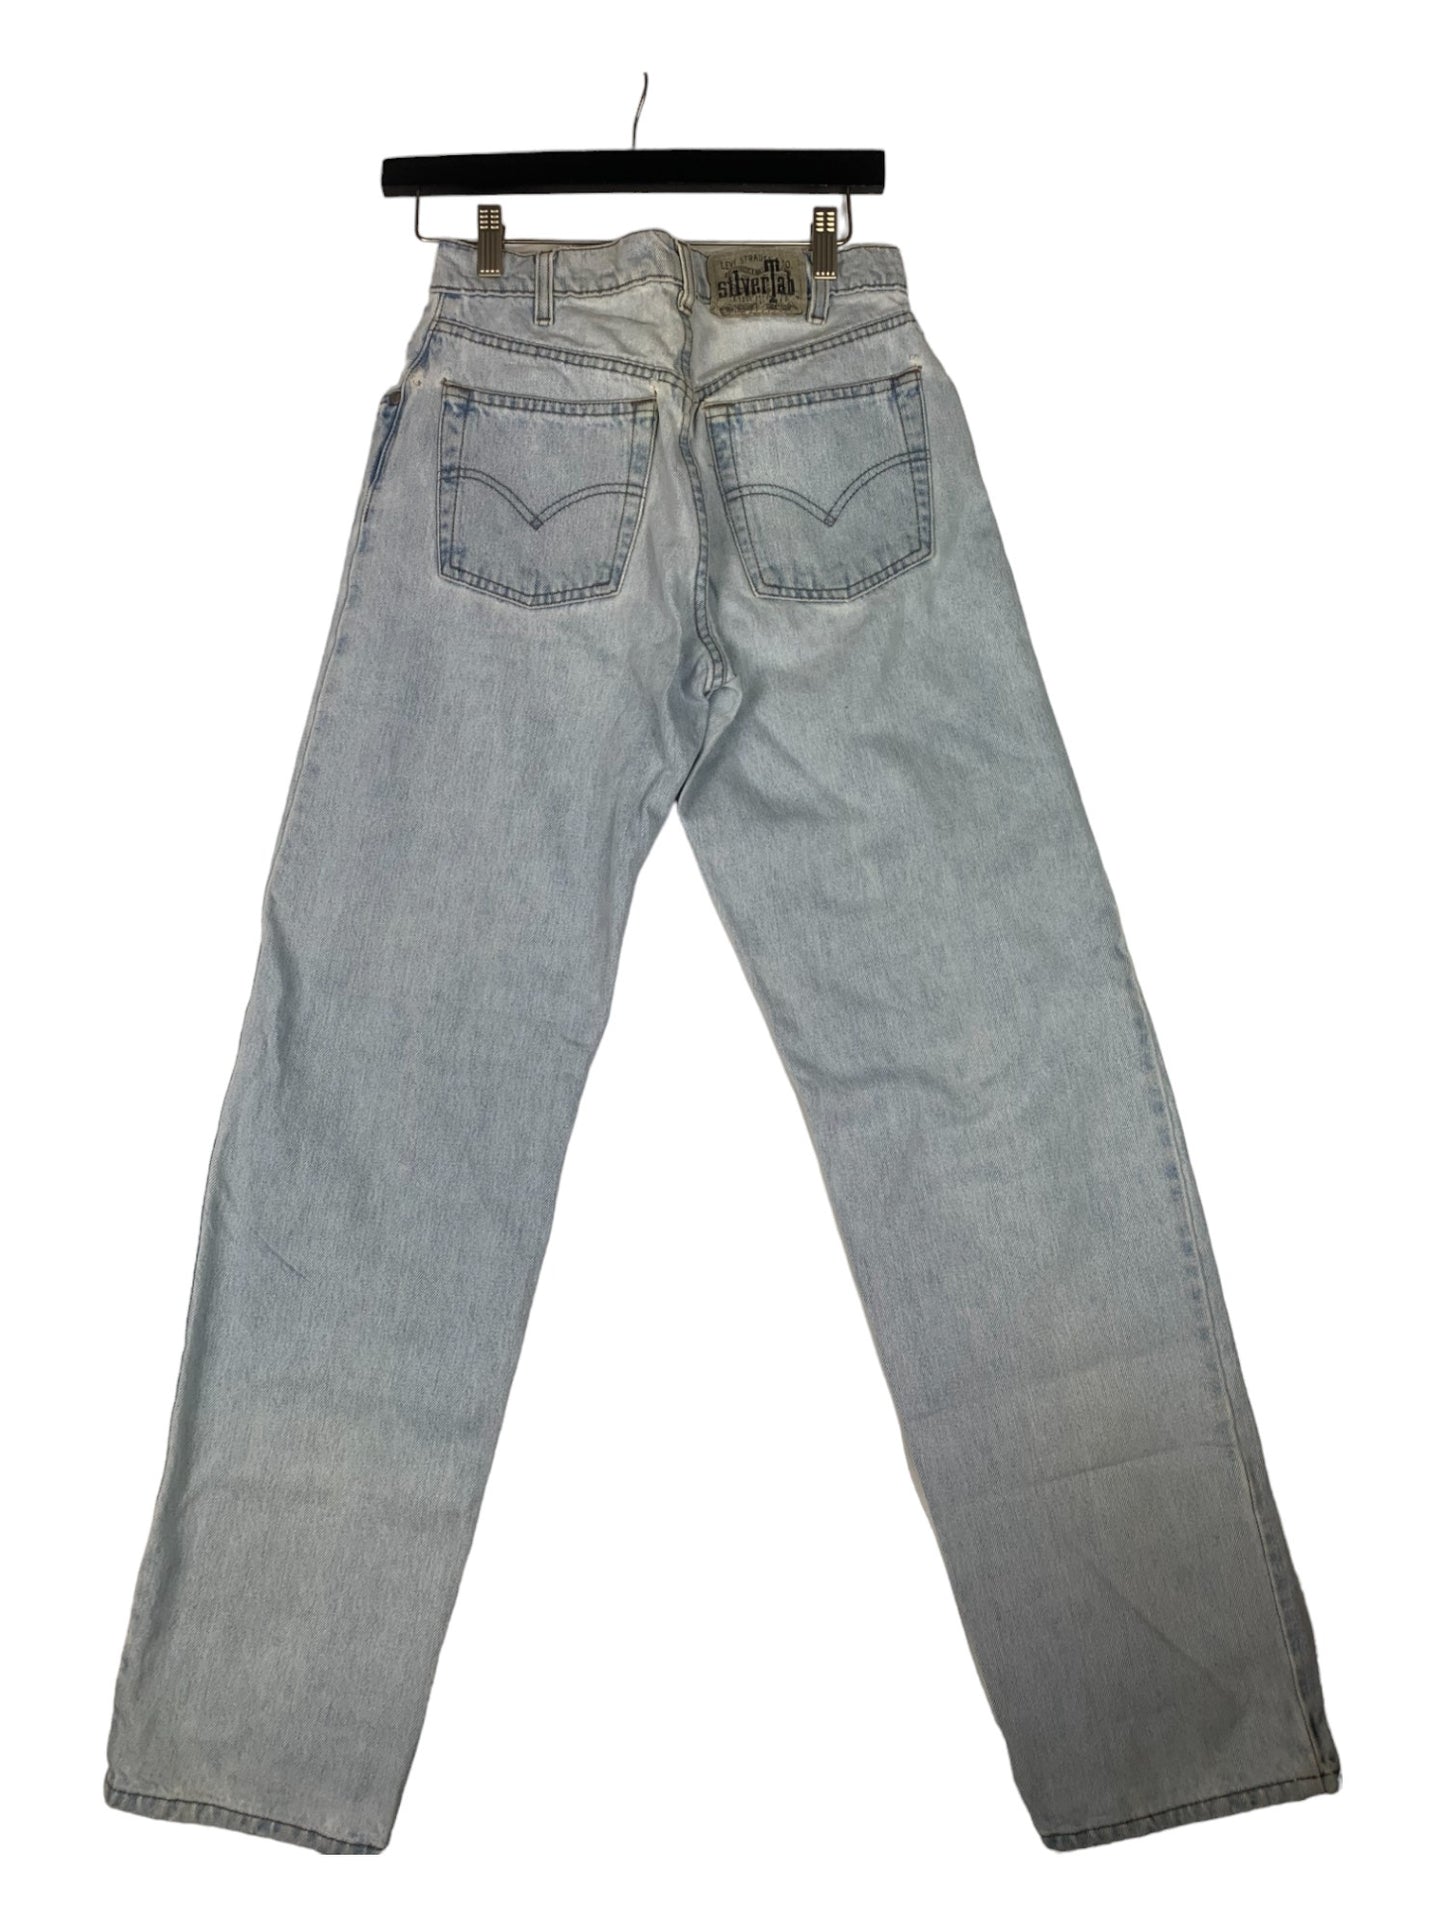 Levis Silver Tab Mom Jeans